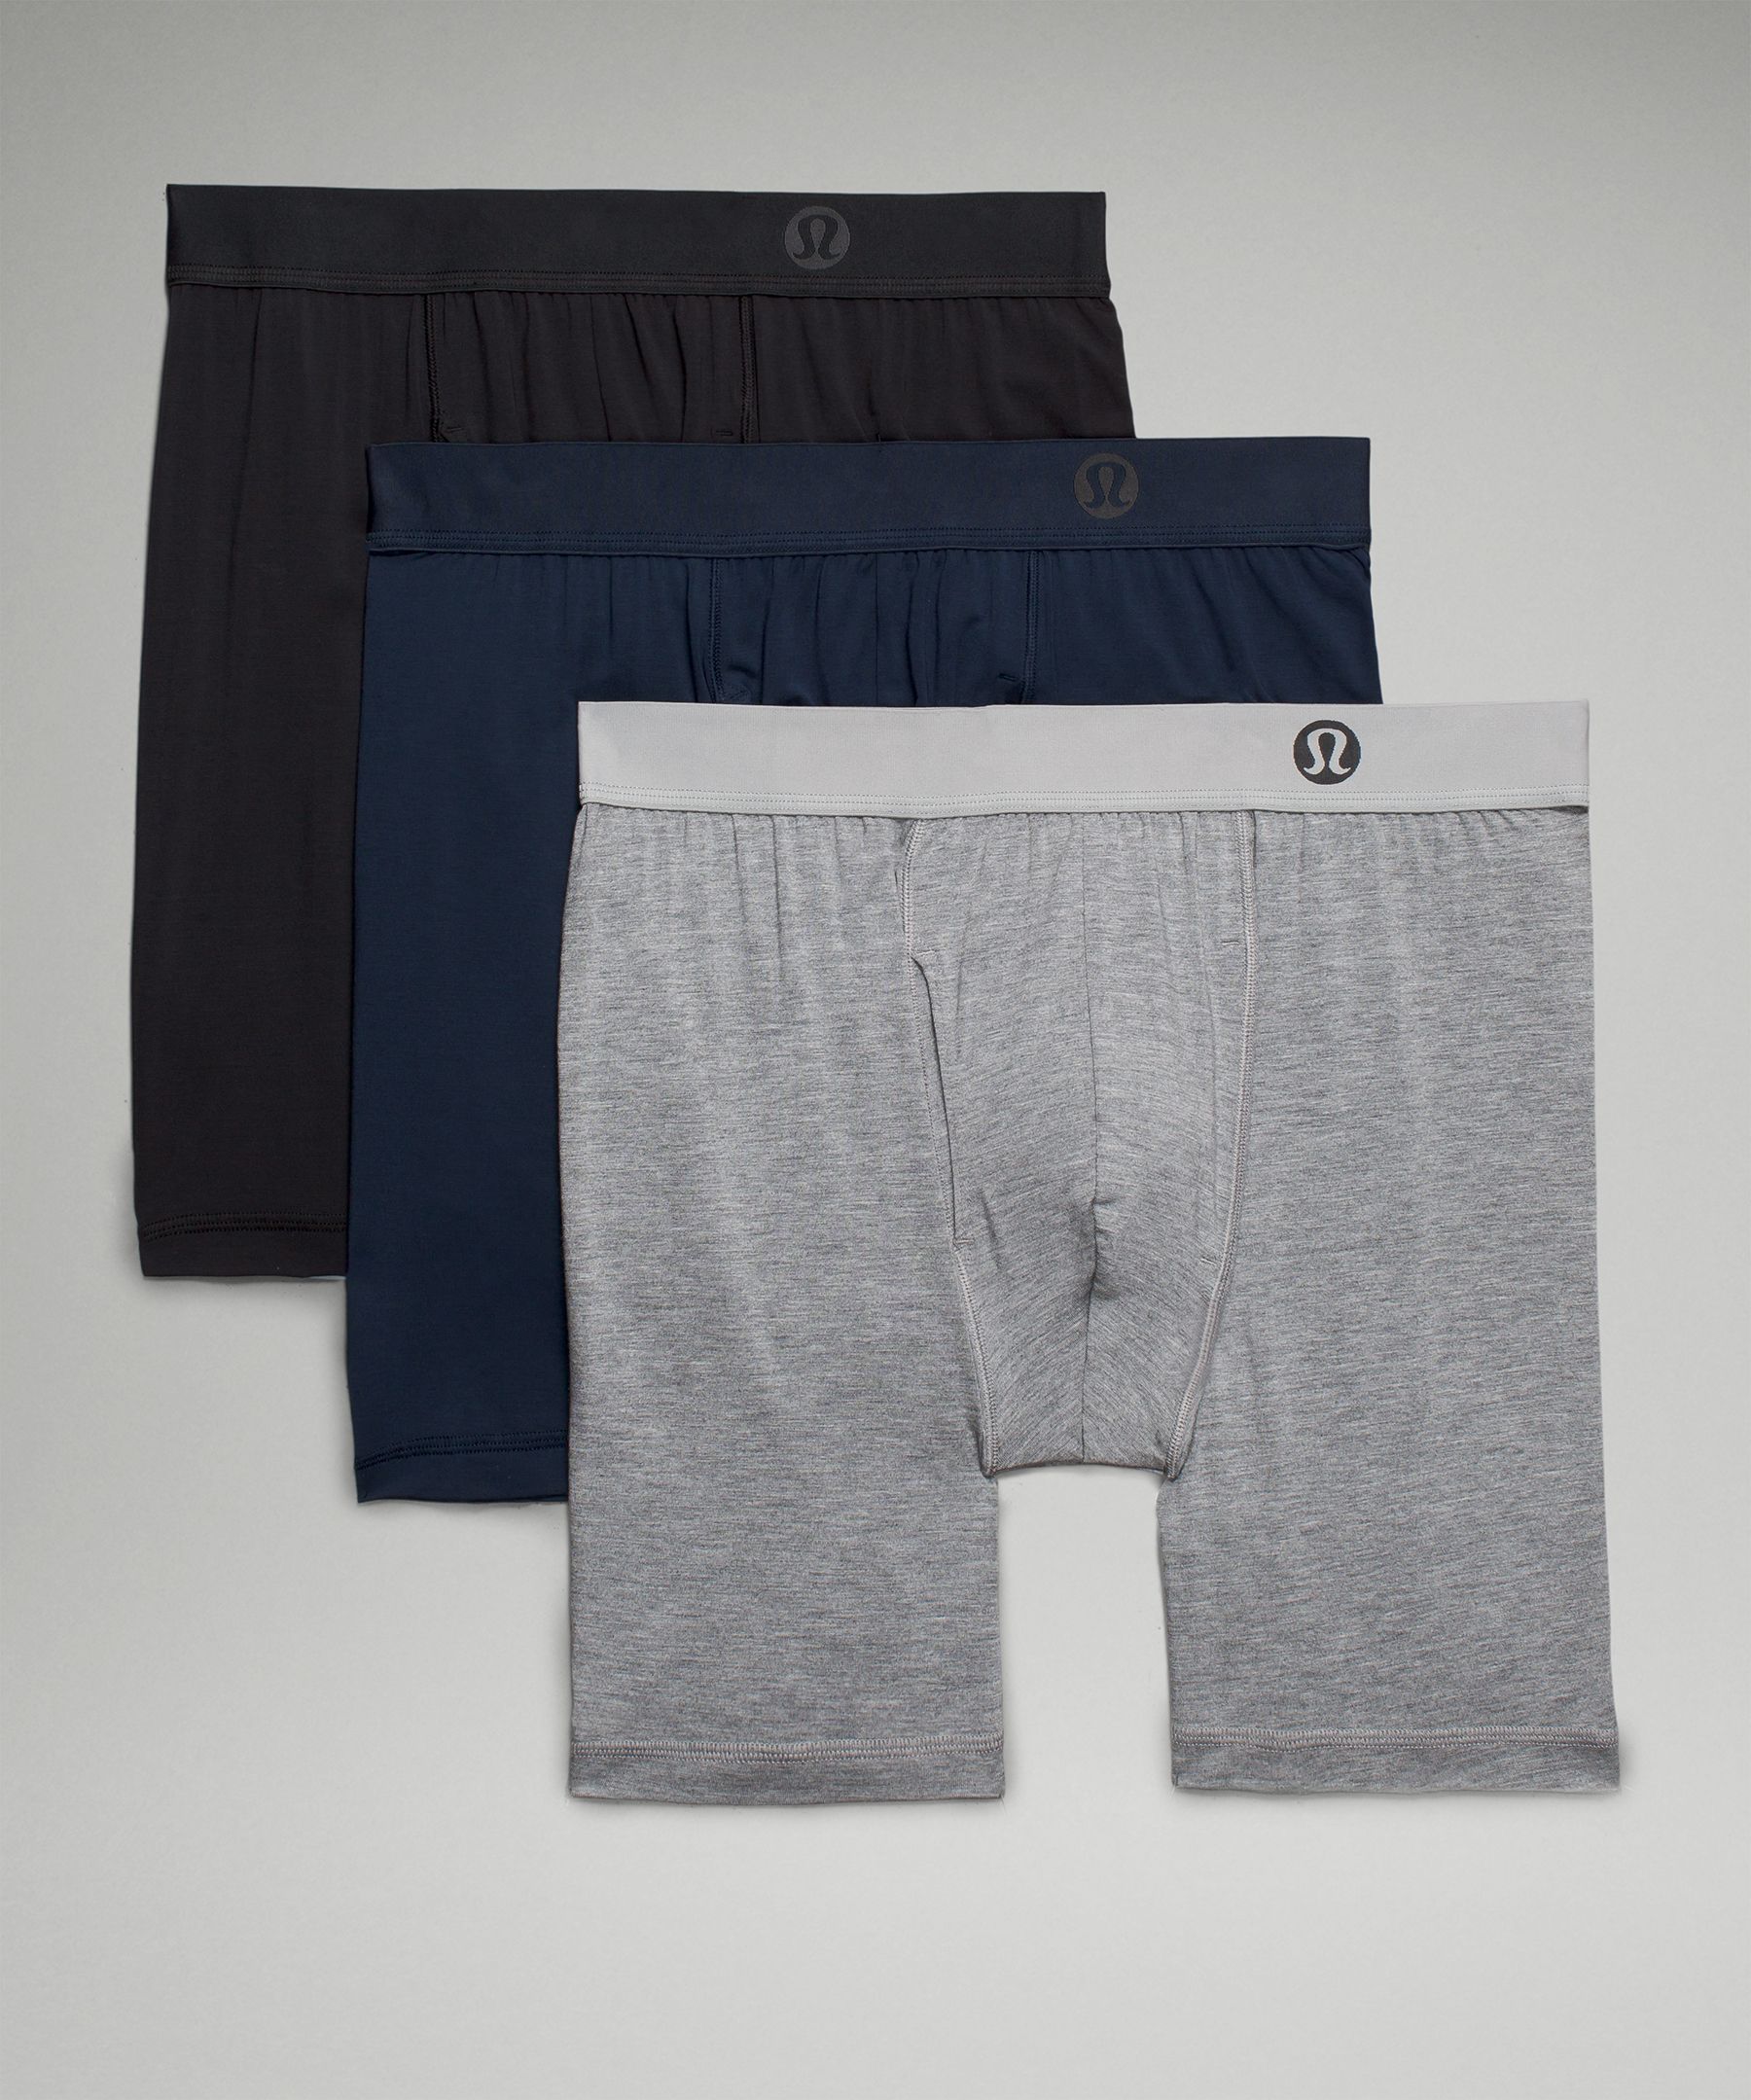 Lululemon Always In Motion Long Boxer with Fly 7